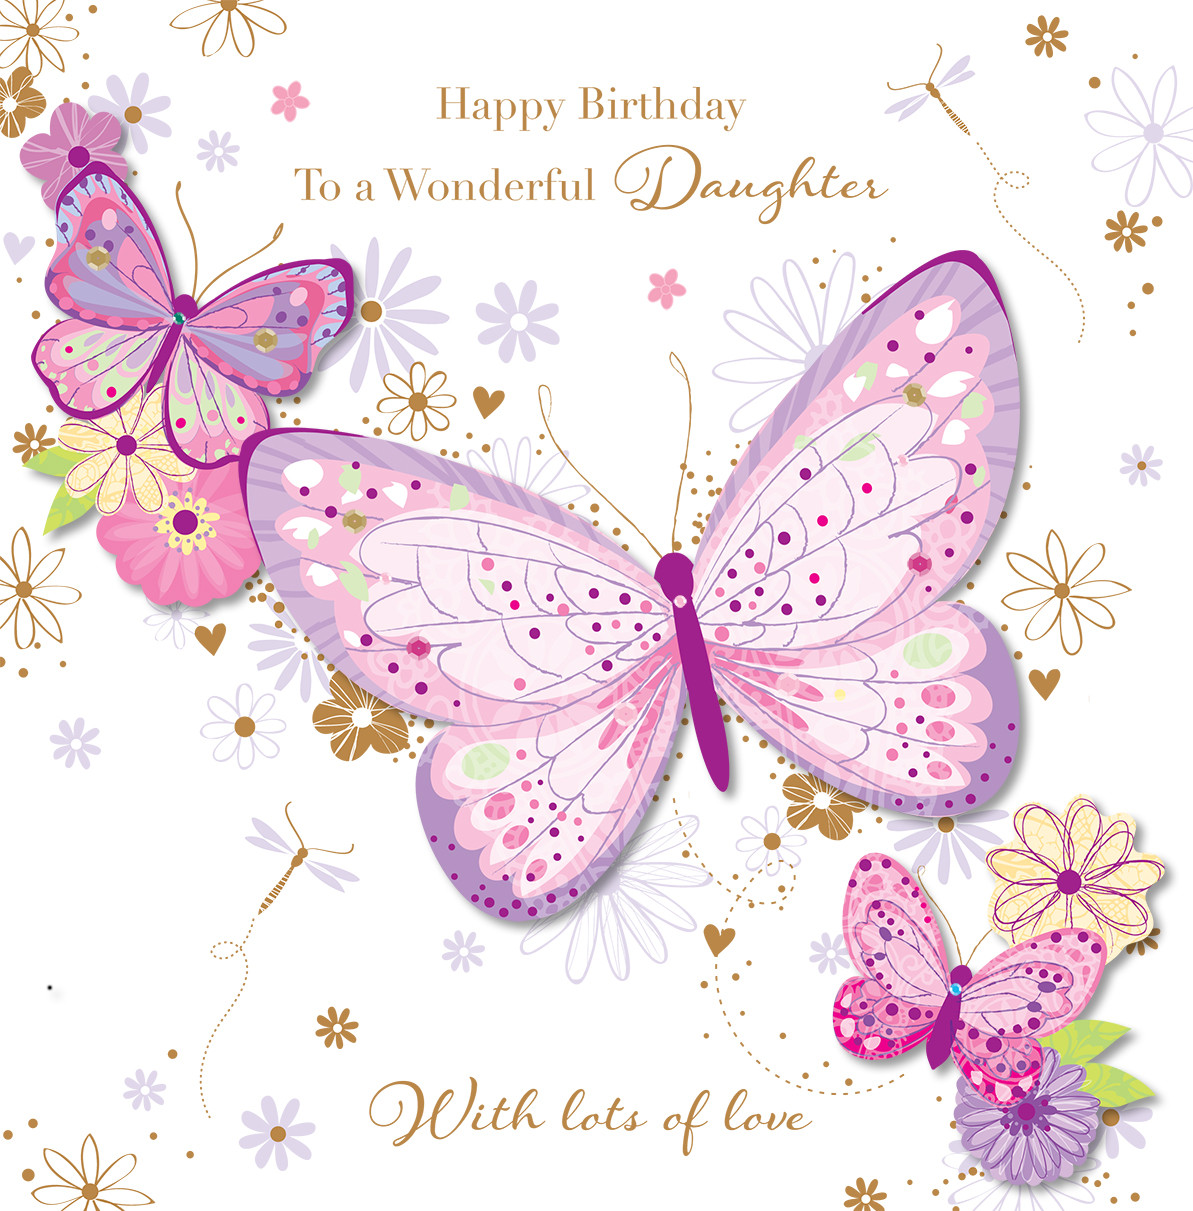 Happy Birthday Cards For Daughter
 Wonderful Daughter Happy Birthday Greeting Card By Talking